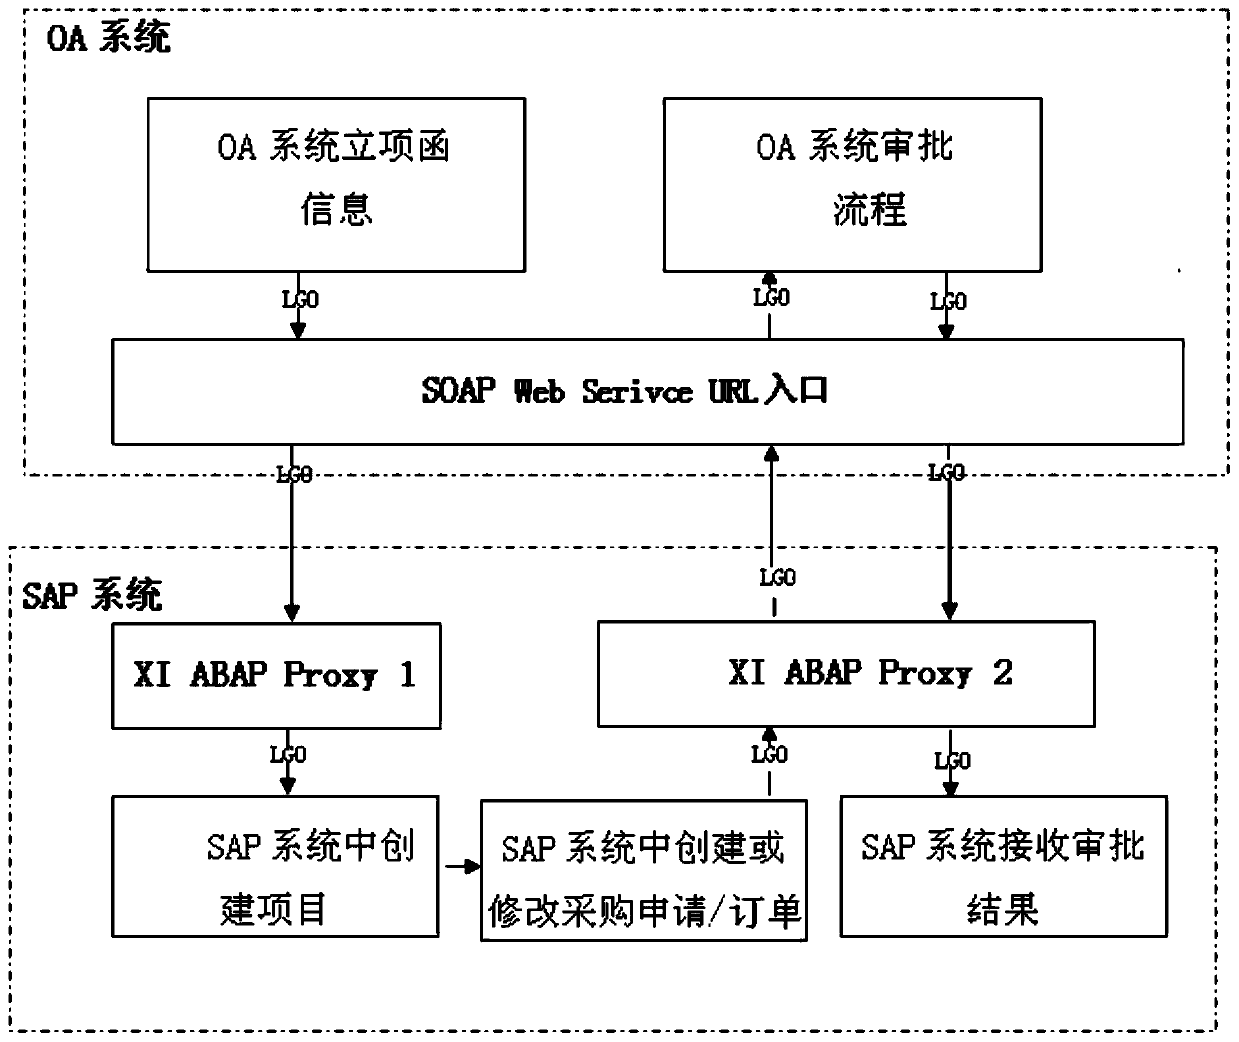 Method for data transmission of integrated interface of OA system and SAP system